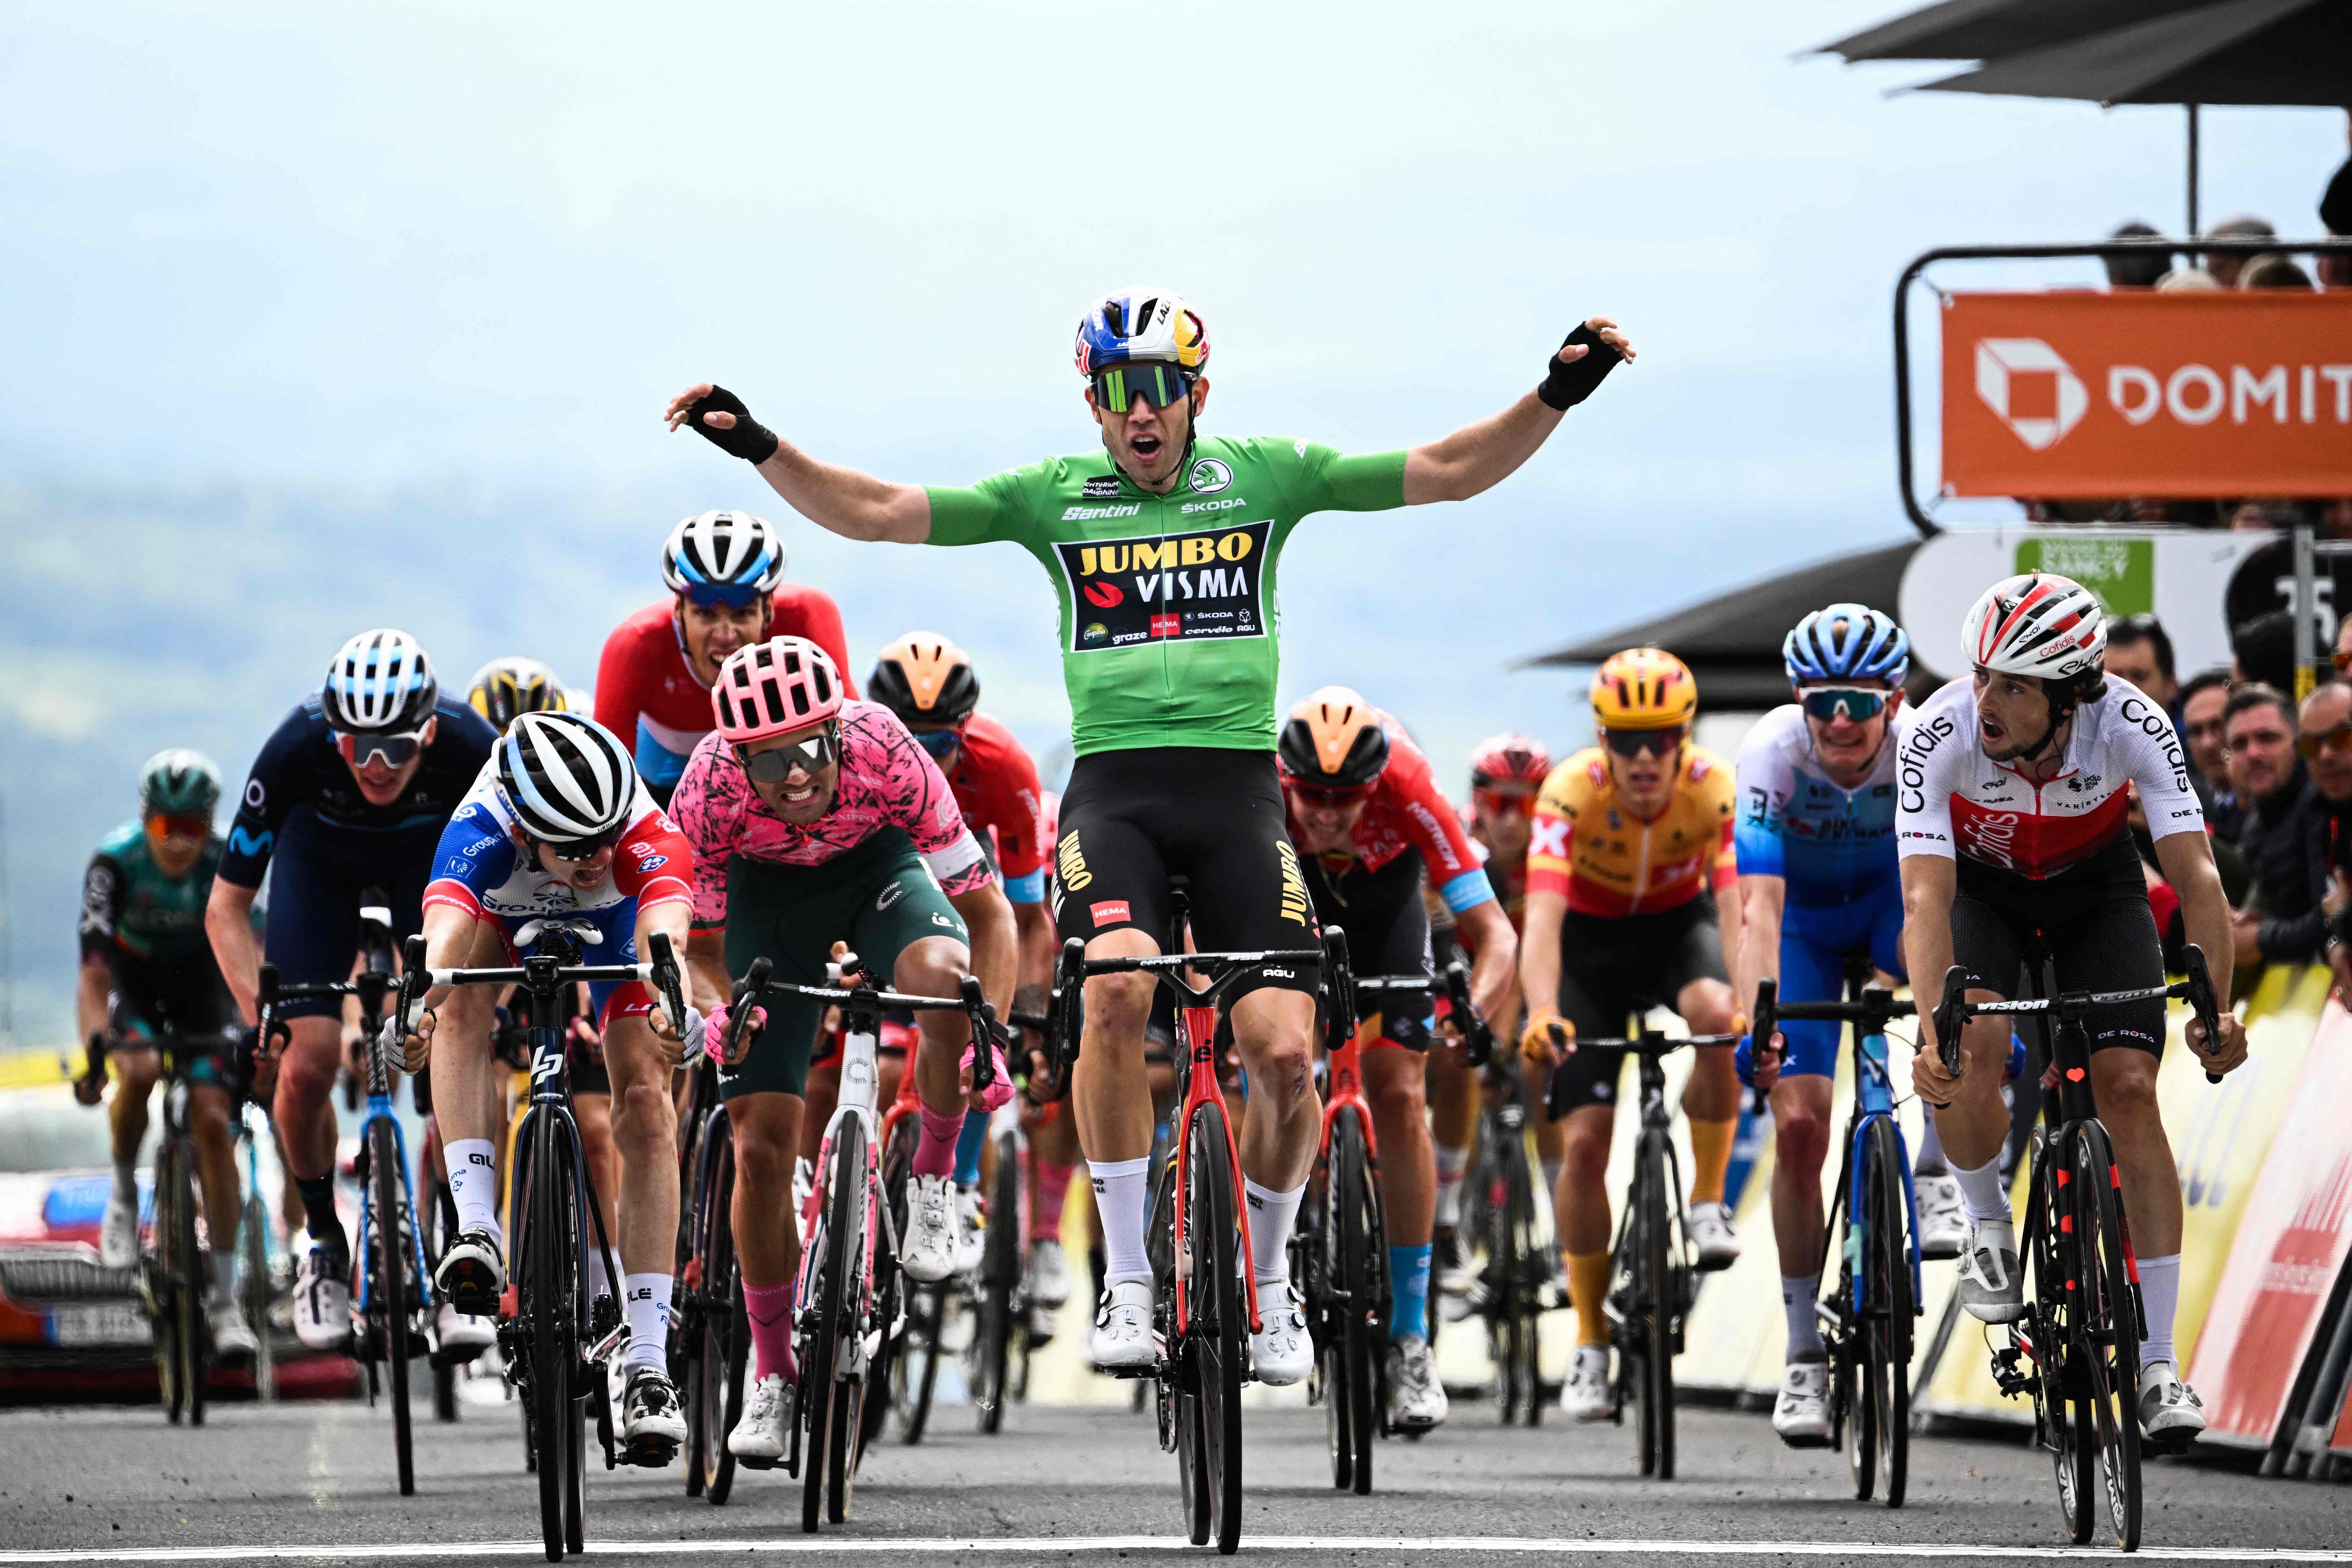 Green jersey of best sprinter Jumbo-Visma team's Belgian rider Wout Van Aert (C) reacts as he crosses the finish line and finishes second next to Groupama-FDJ's French rider David Gaudu. Credit: AFP Photo